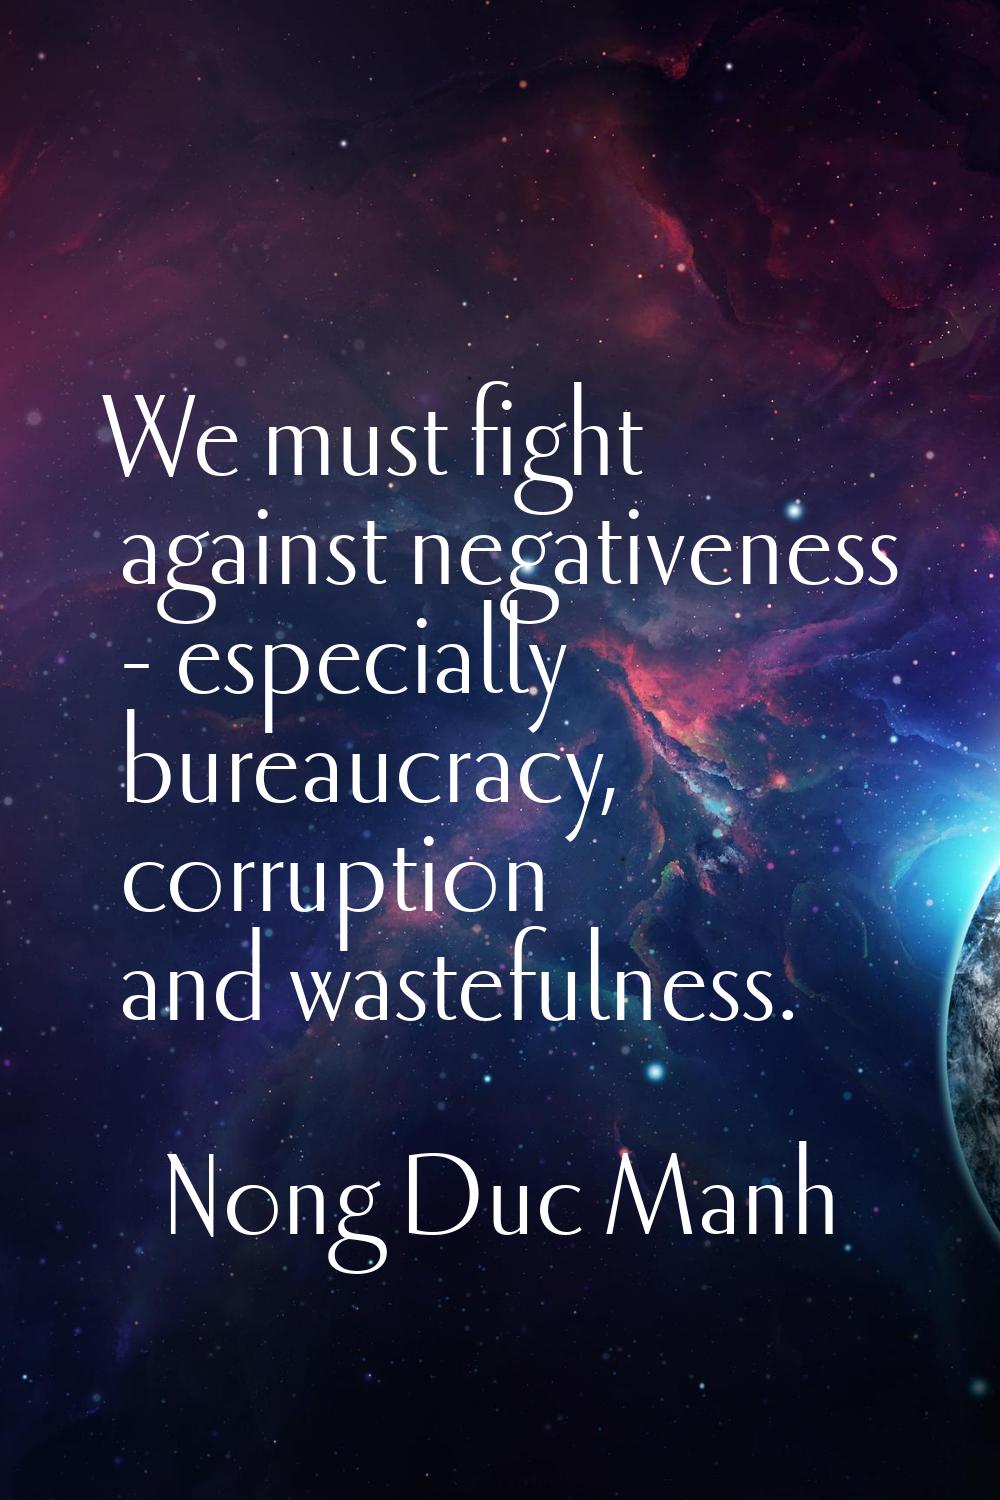 We must fight against negativeness - especially bureaucracy, corruption and wastefulness.